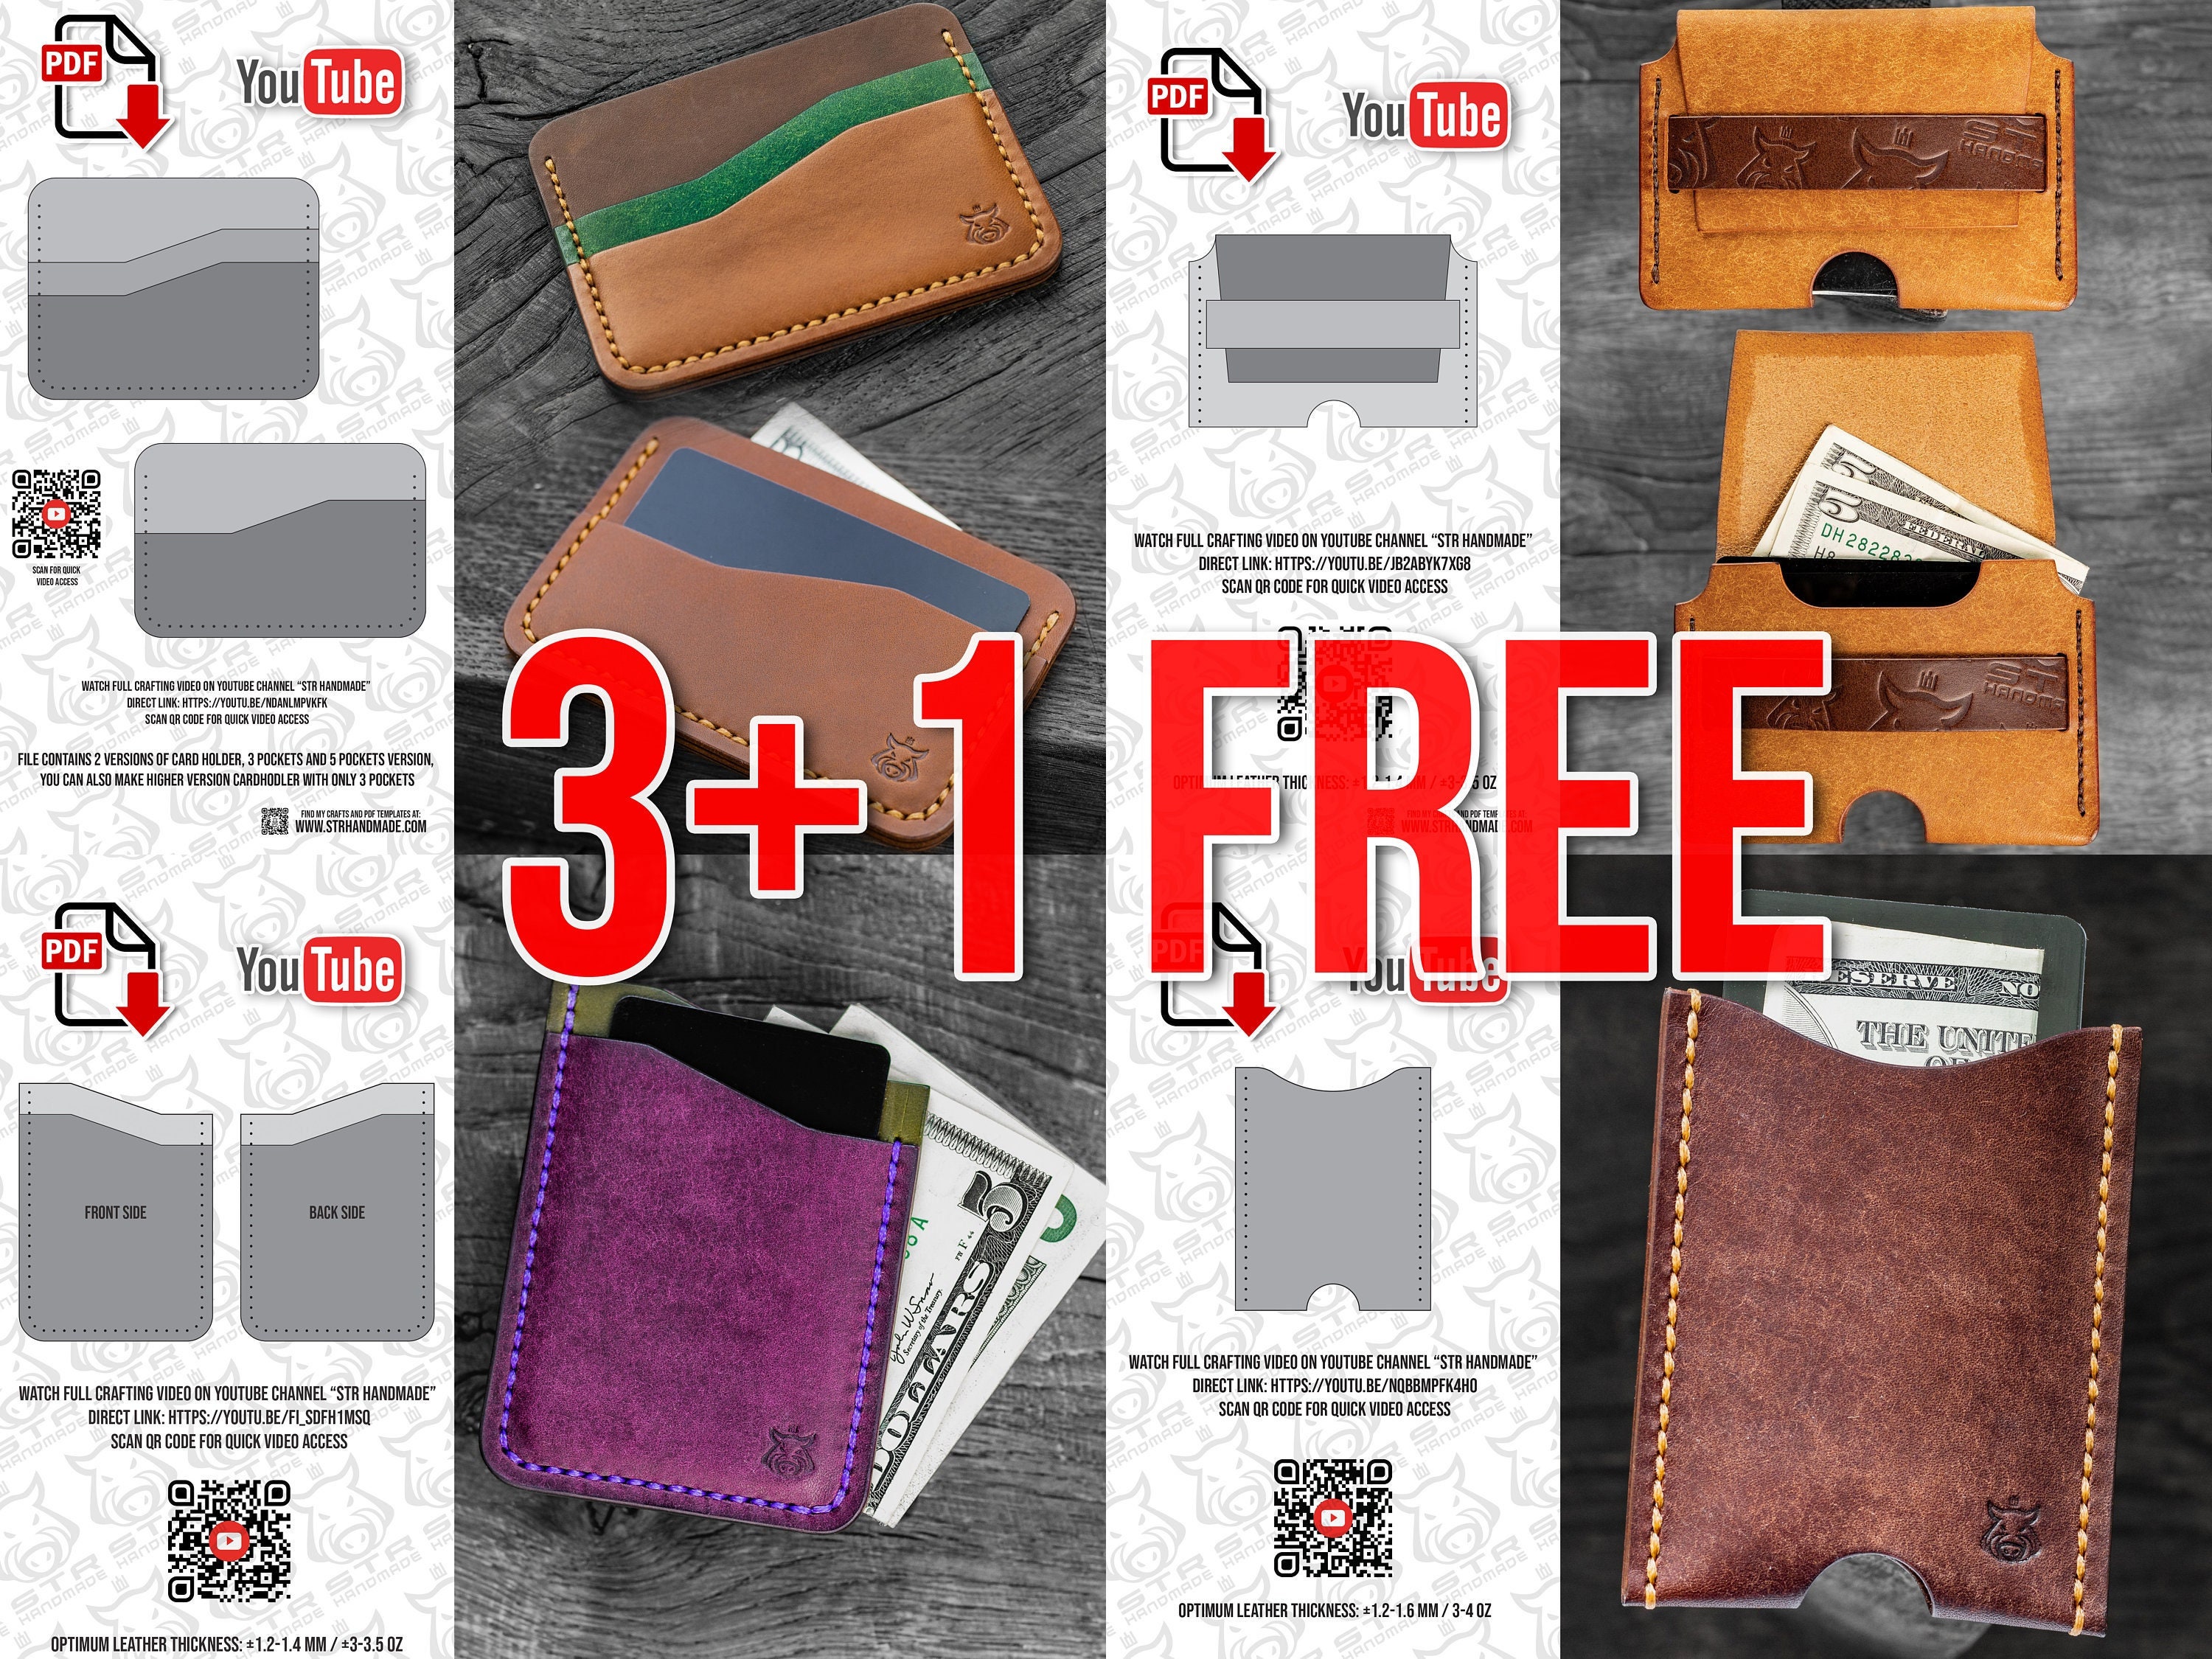 DIY Leather Wallet Kit, Gift Make Your Own Coin Pouch 